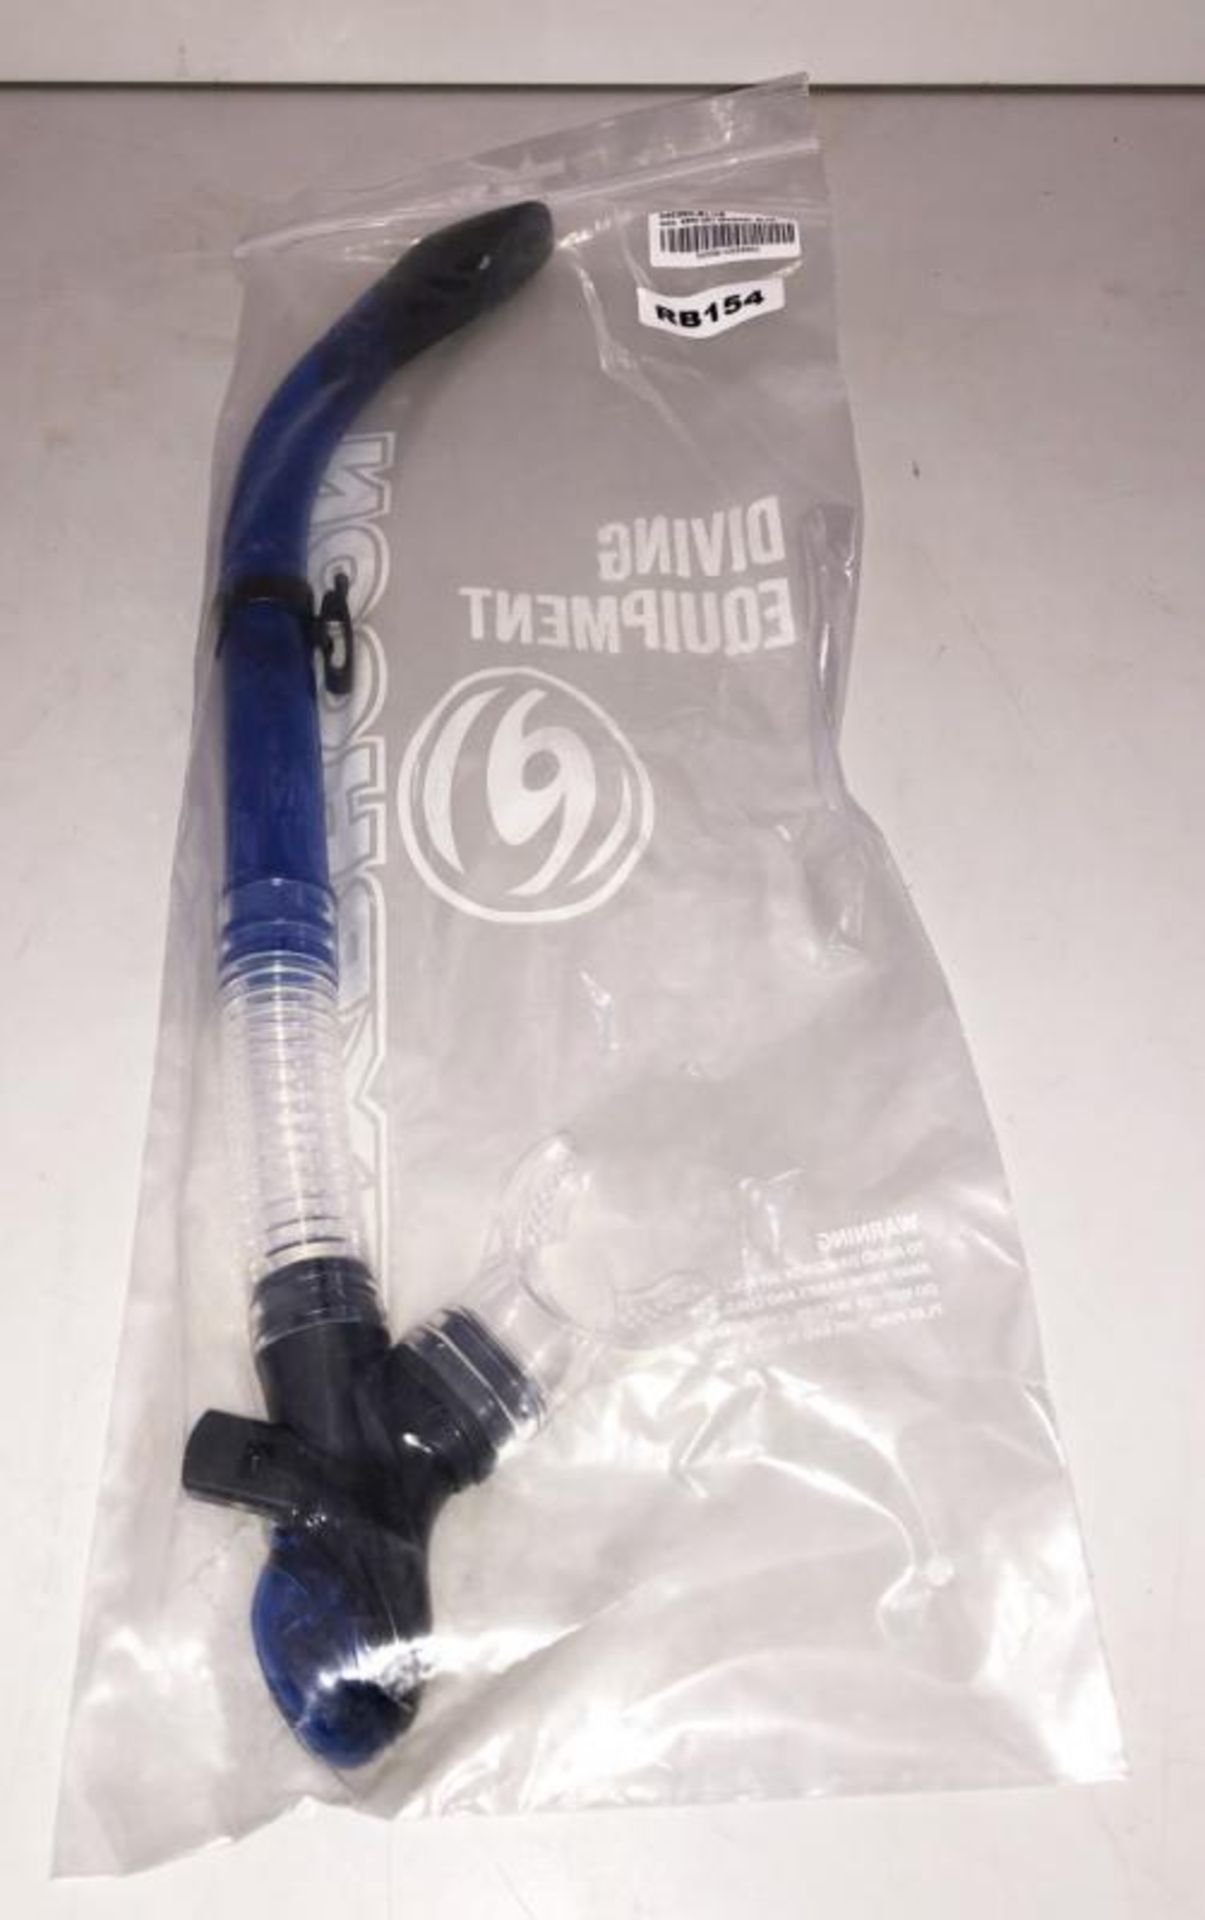 34 x Branded Diving Snorkel's - CL349 - Altrincham WA14 - Brand New! - Image 28 of 30